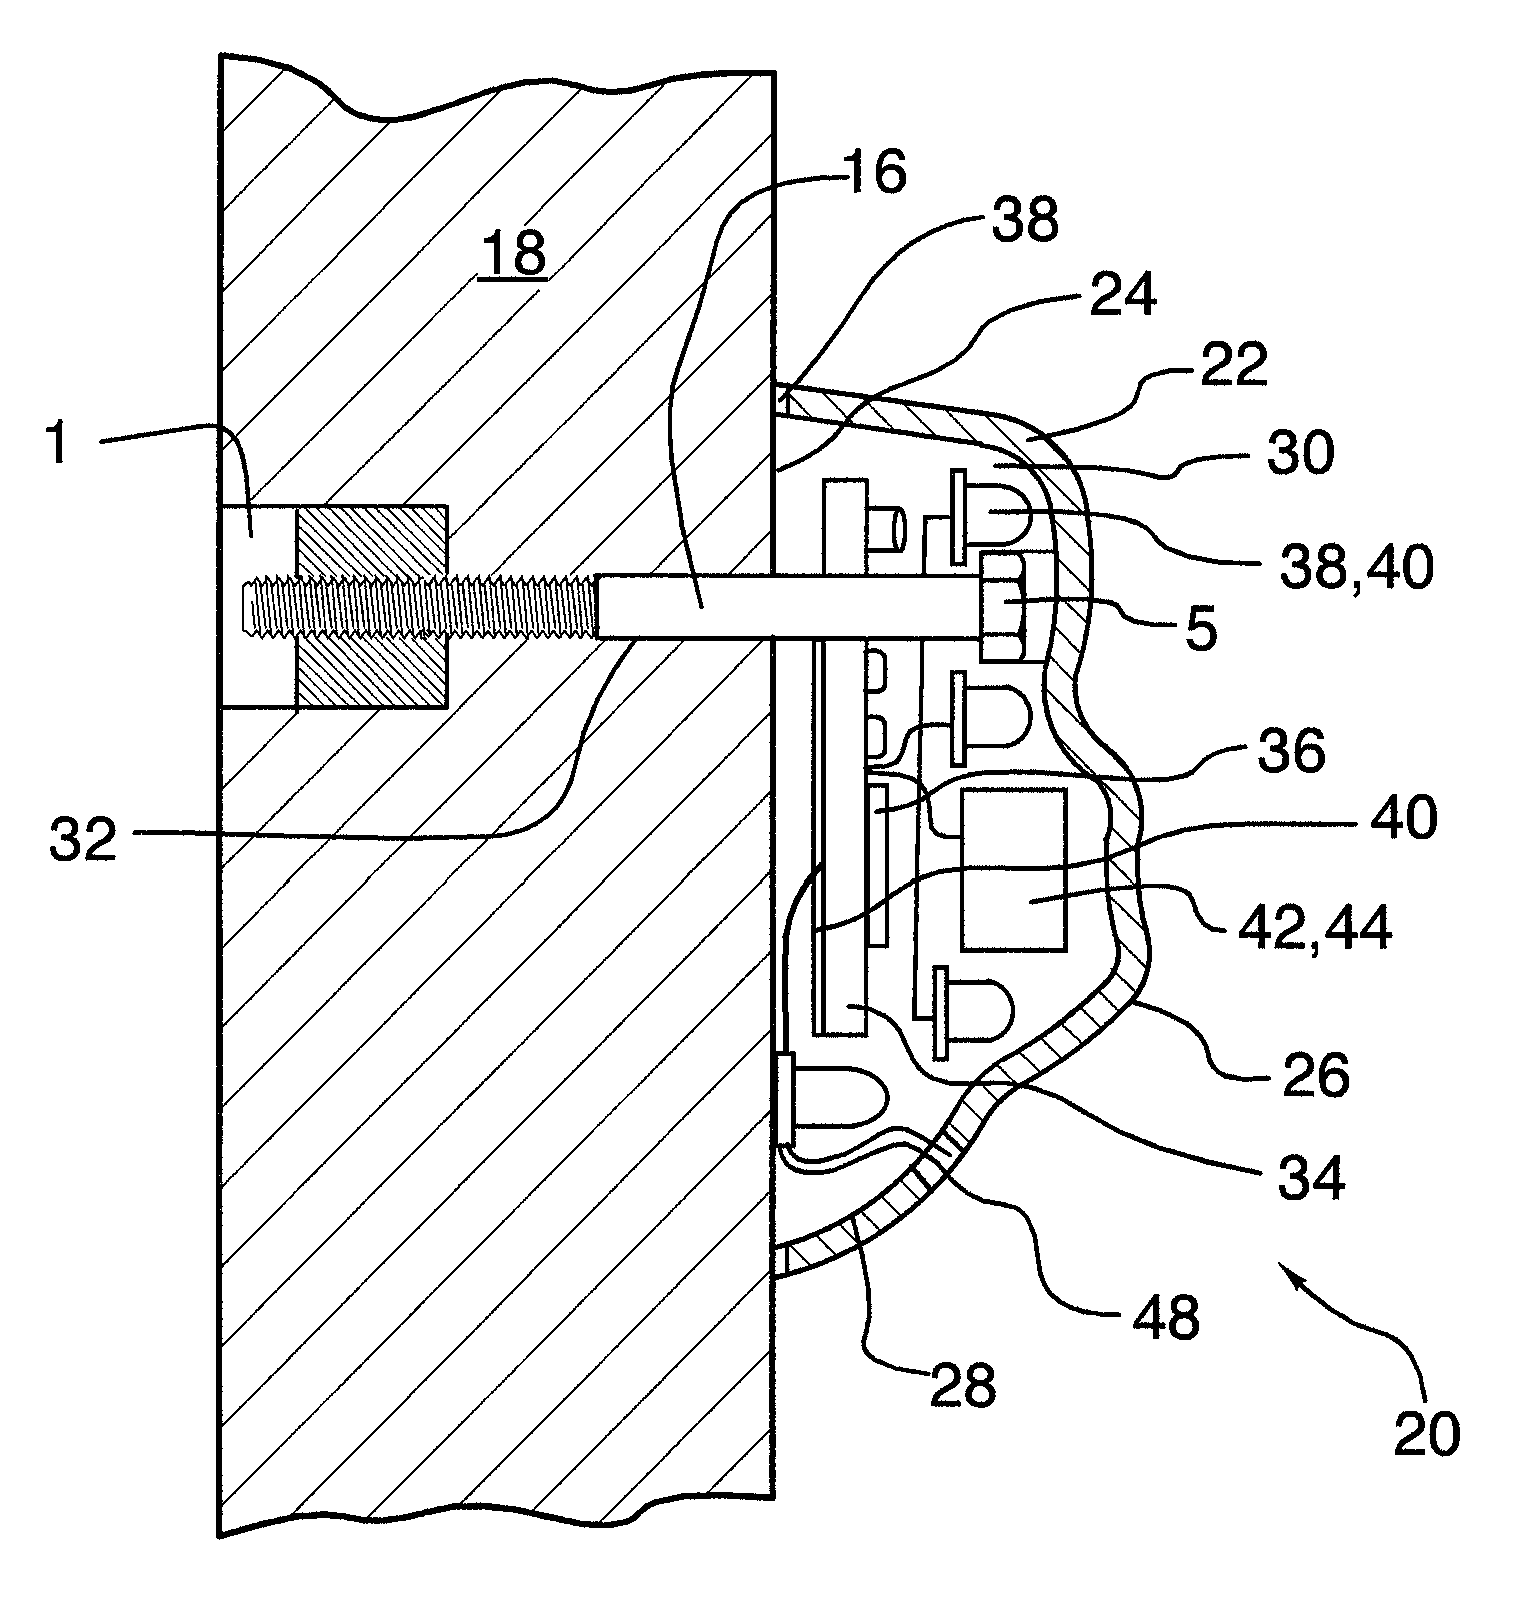 Wireless pressure sensing rock climbing handhold and dynamic method of customized routing